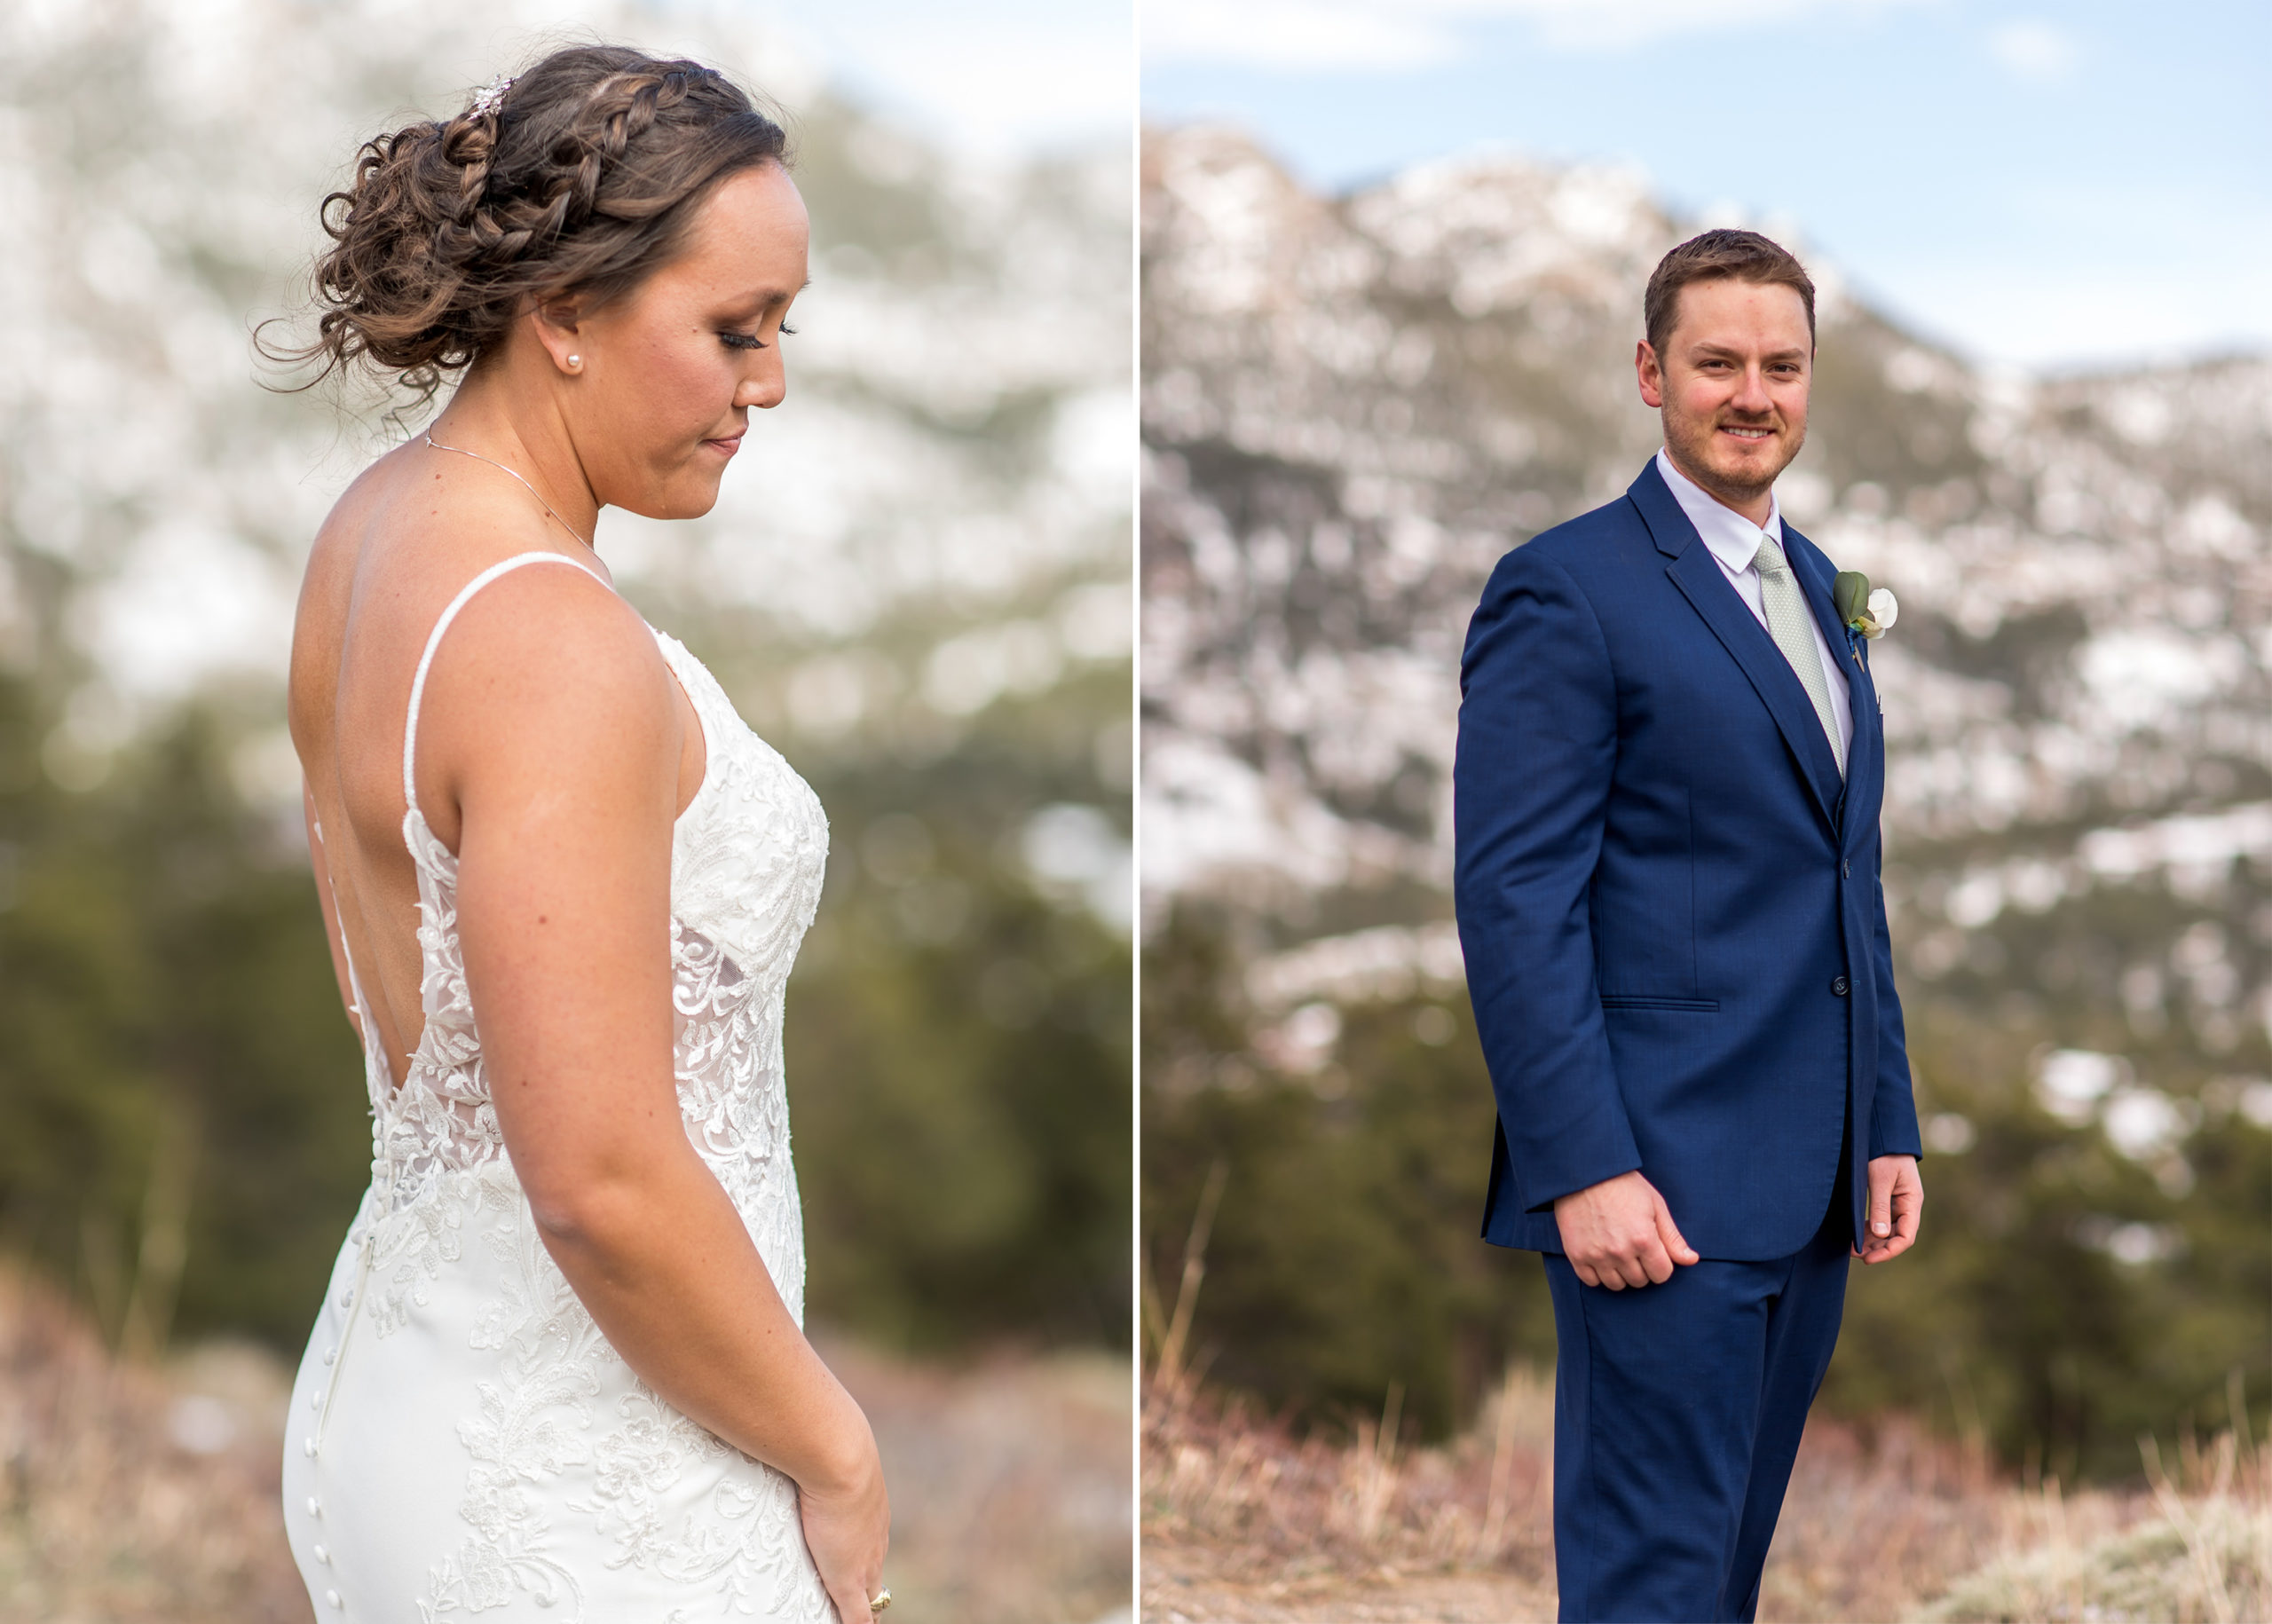 The bride and groom poses during their YMCA of the Rockies wedding in Estes Park, Colorado.